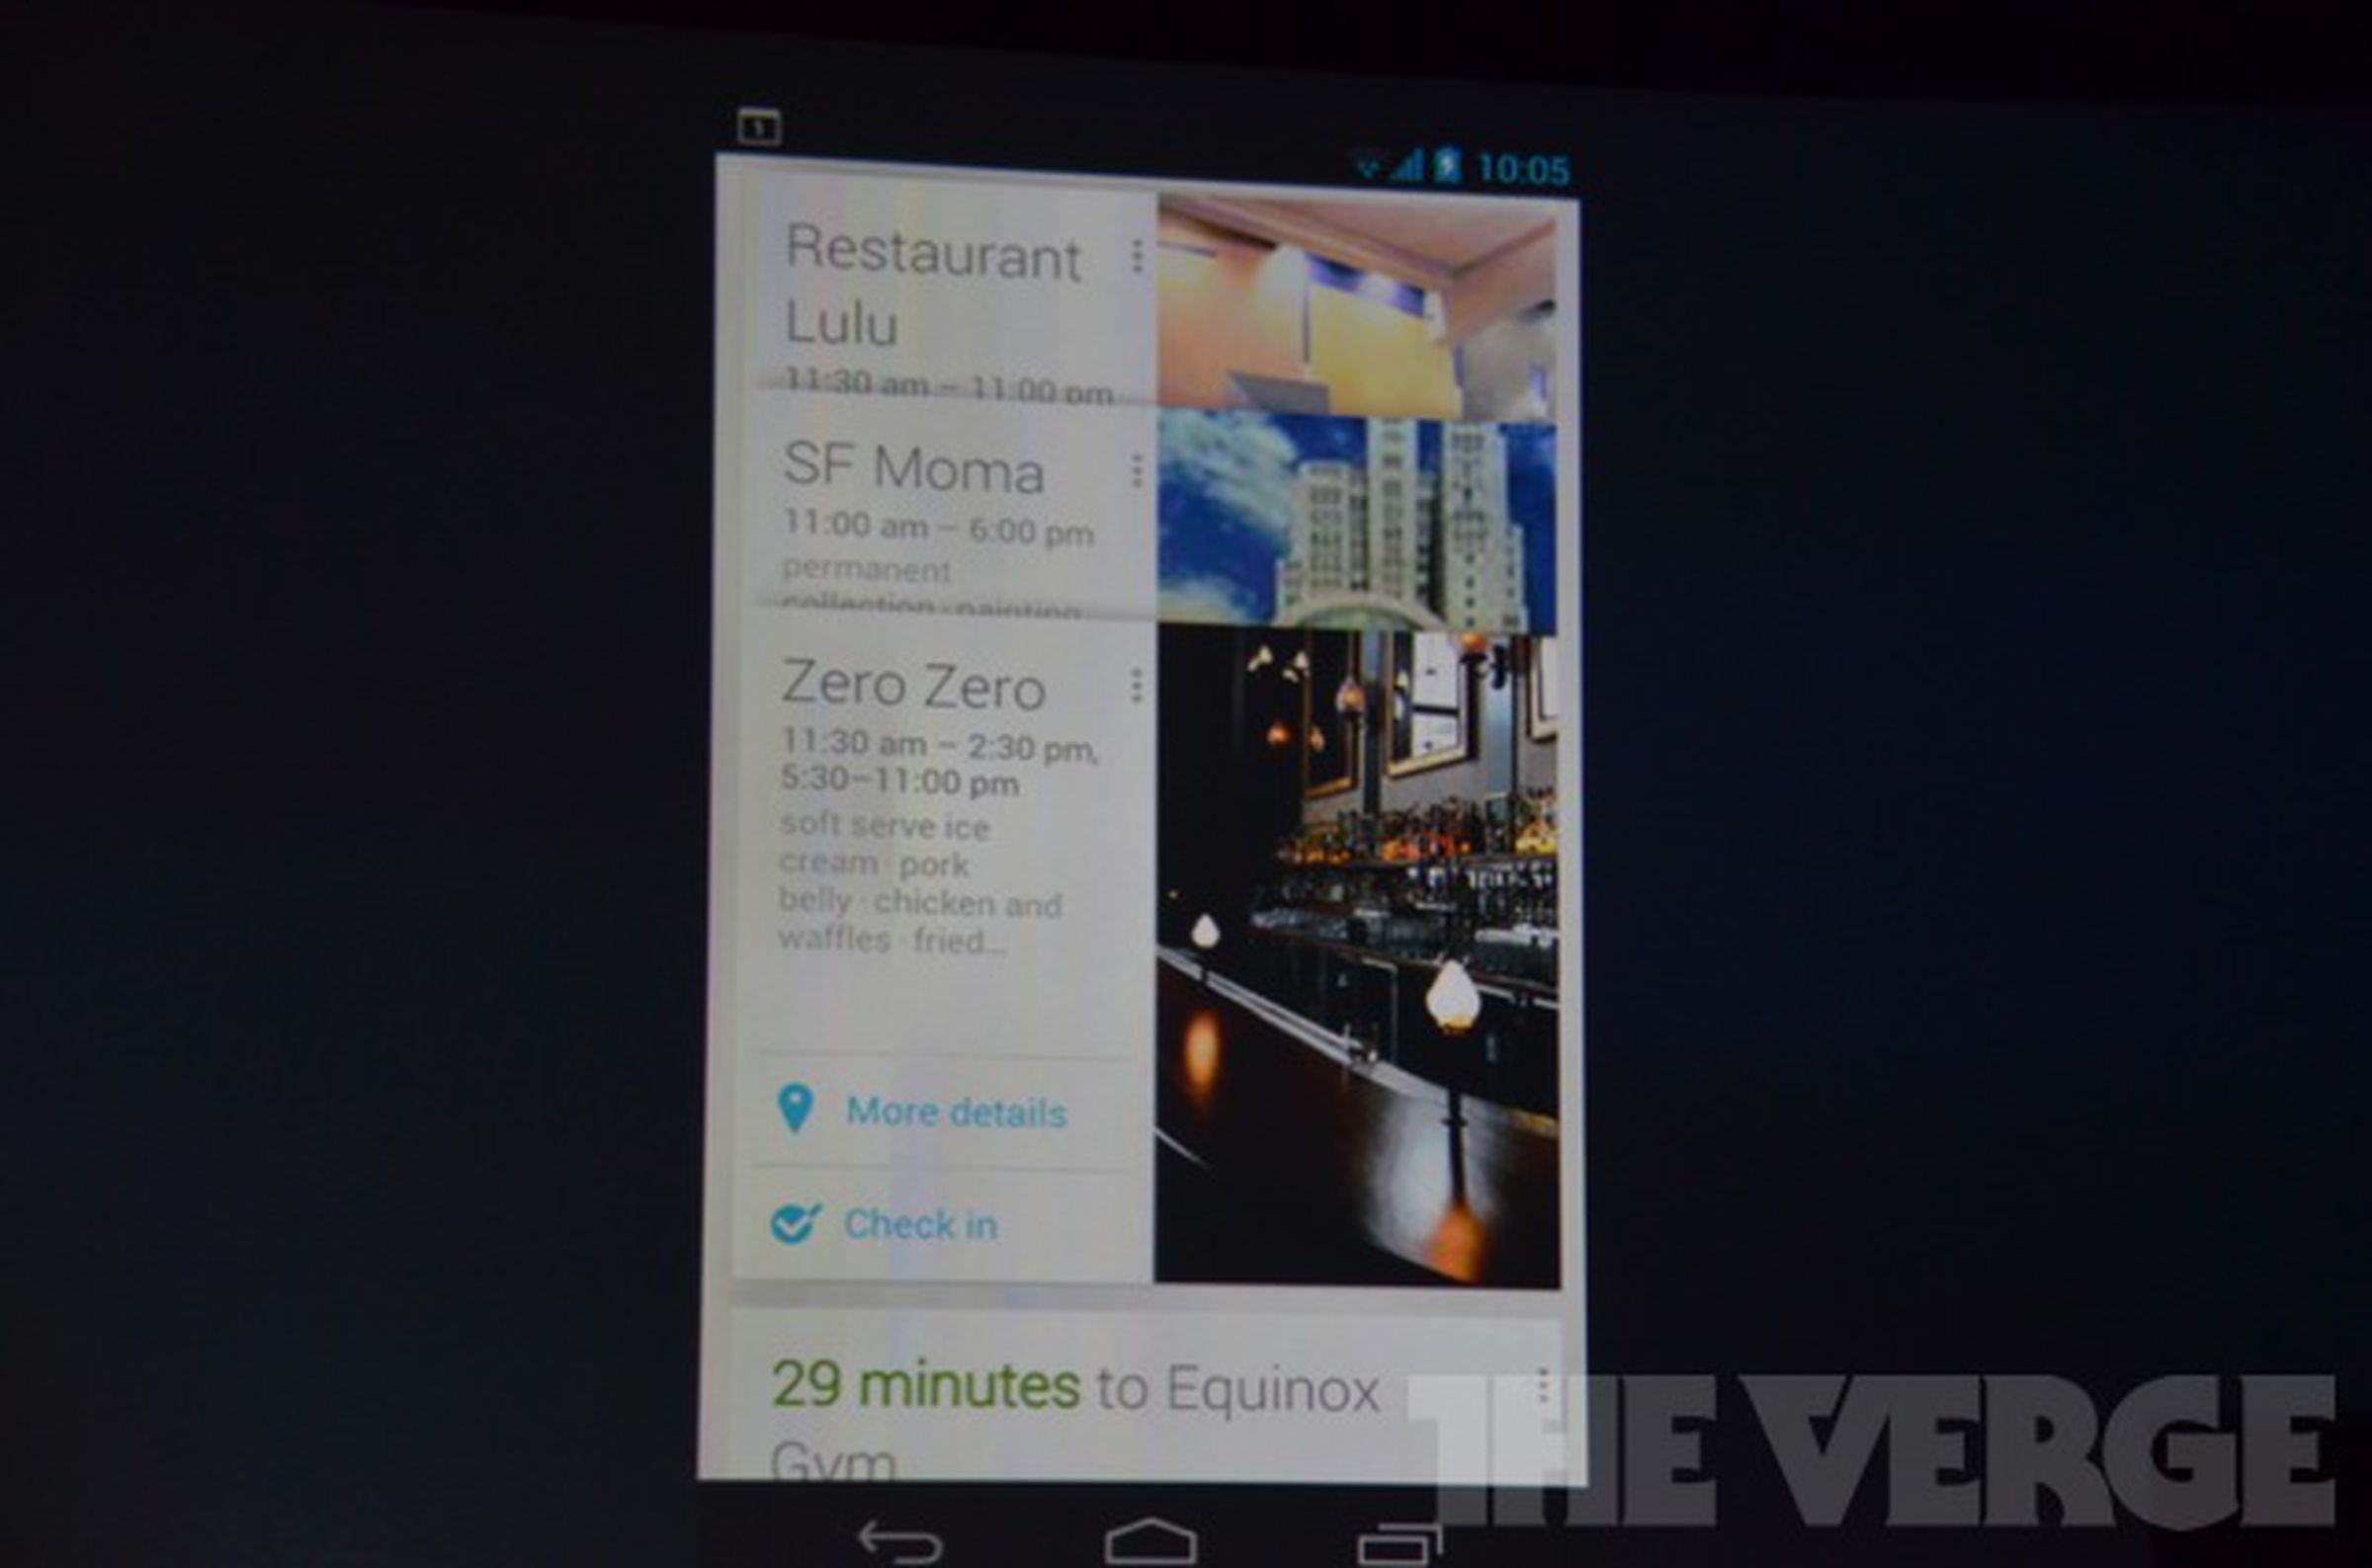 Android 4.1 Jelly Bean images from Google I/O 2012